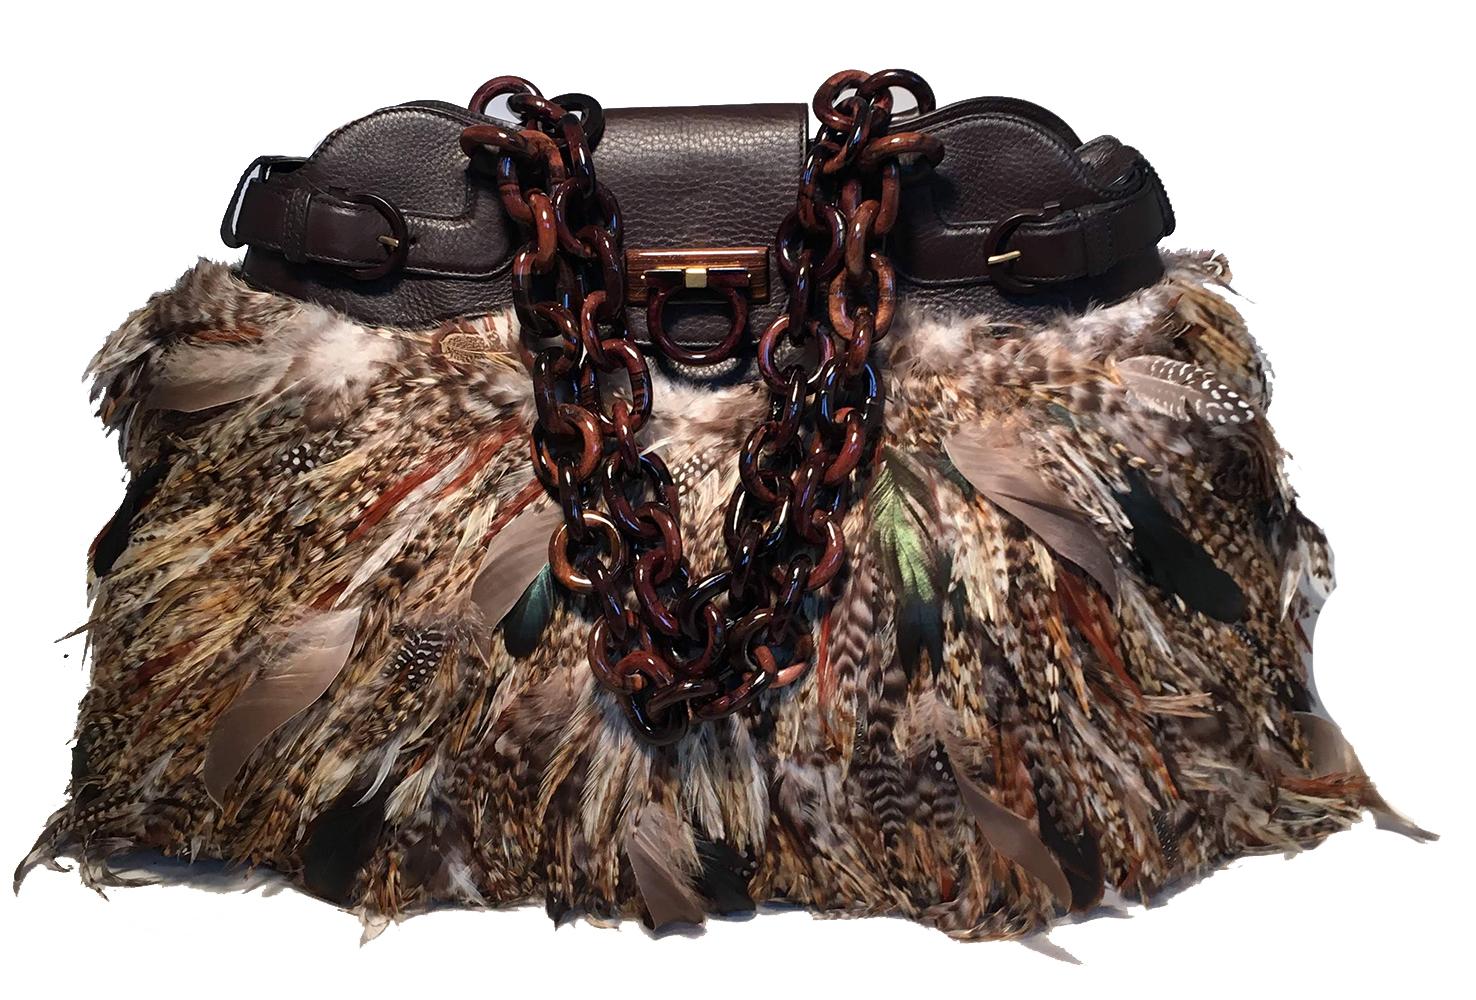 Salvatore Ferragamo Brown Leather Pheasant Feather Shoulder Bag Tote in excellent condition. Brown leather top with beautiful wooden brown chain link shoulder straps and natural multicolor pheasant feather body. Front flap latch closure opens to a